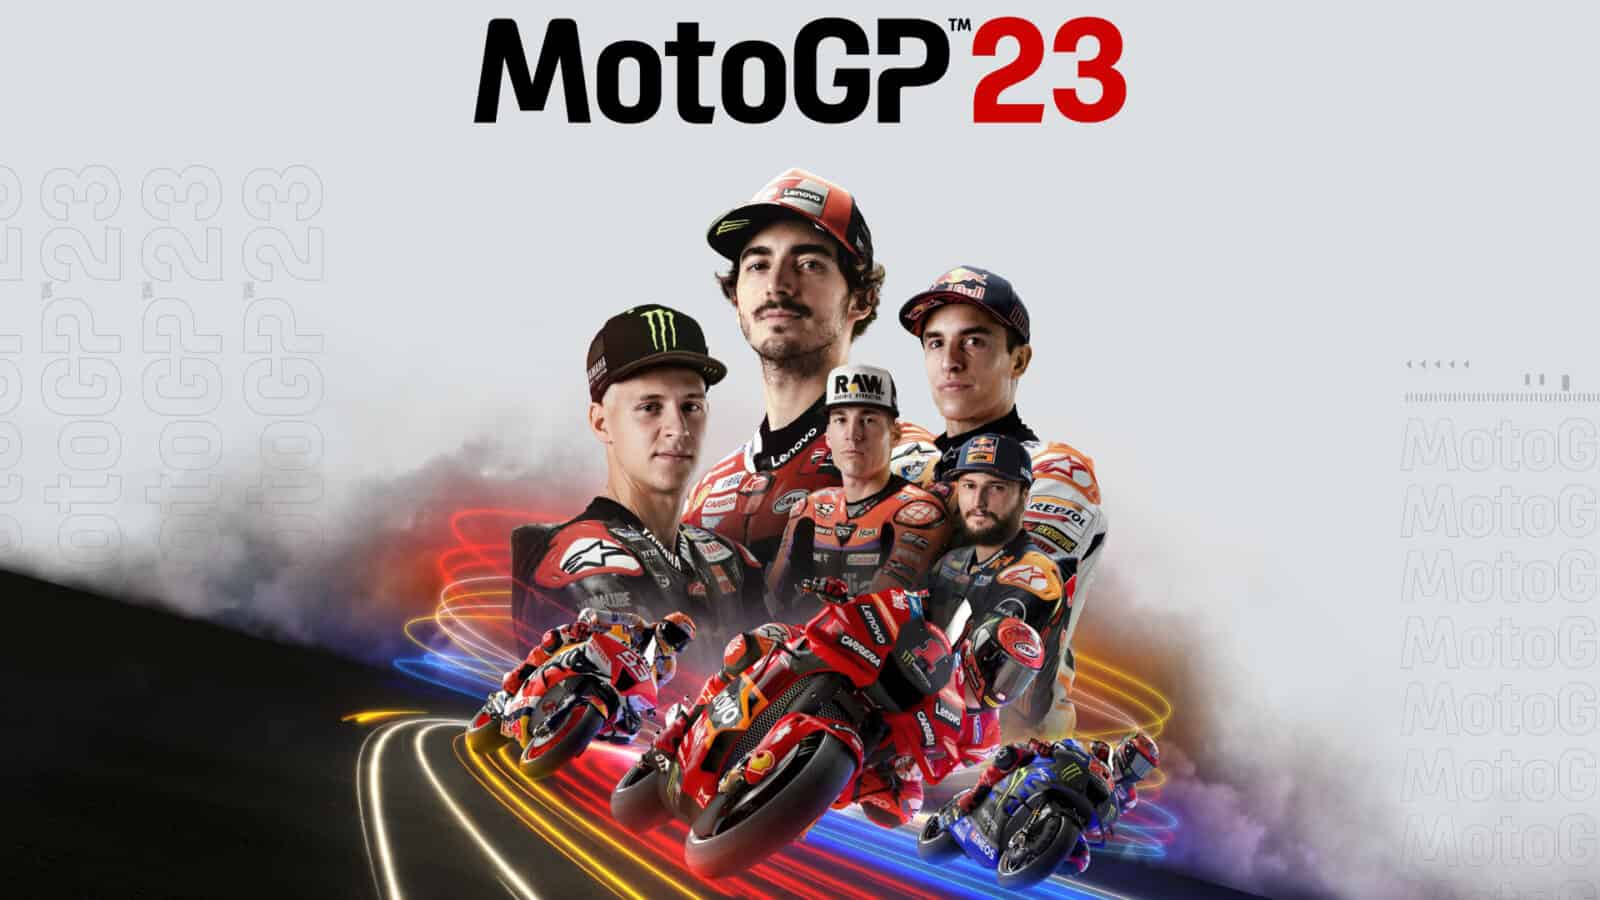 MotoGP 23 the game is coming on June 8